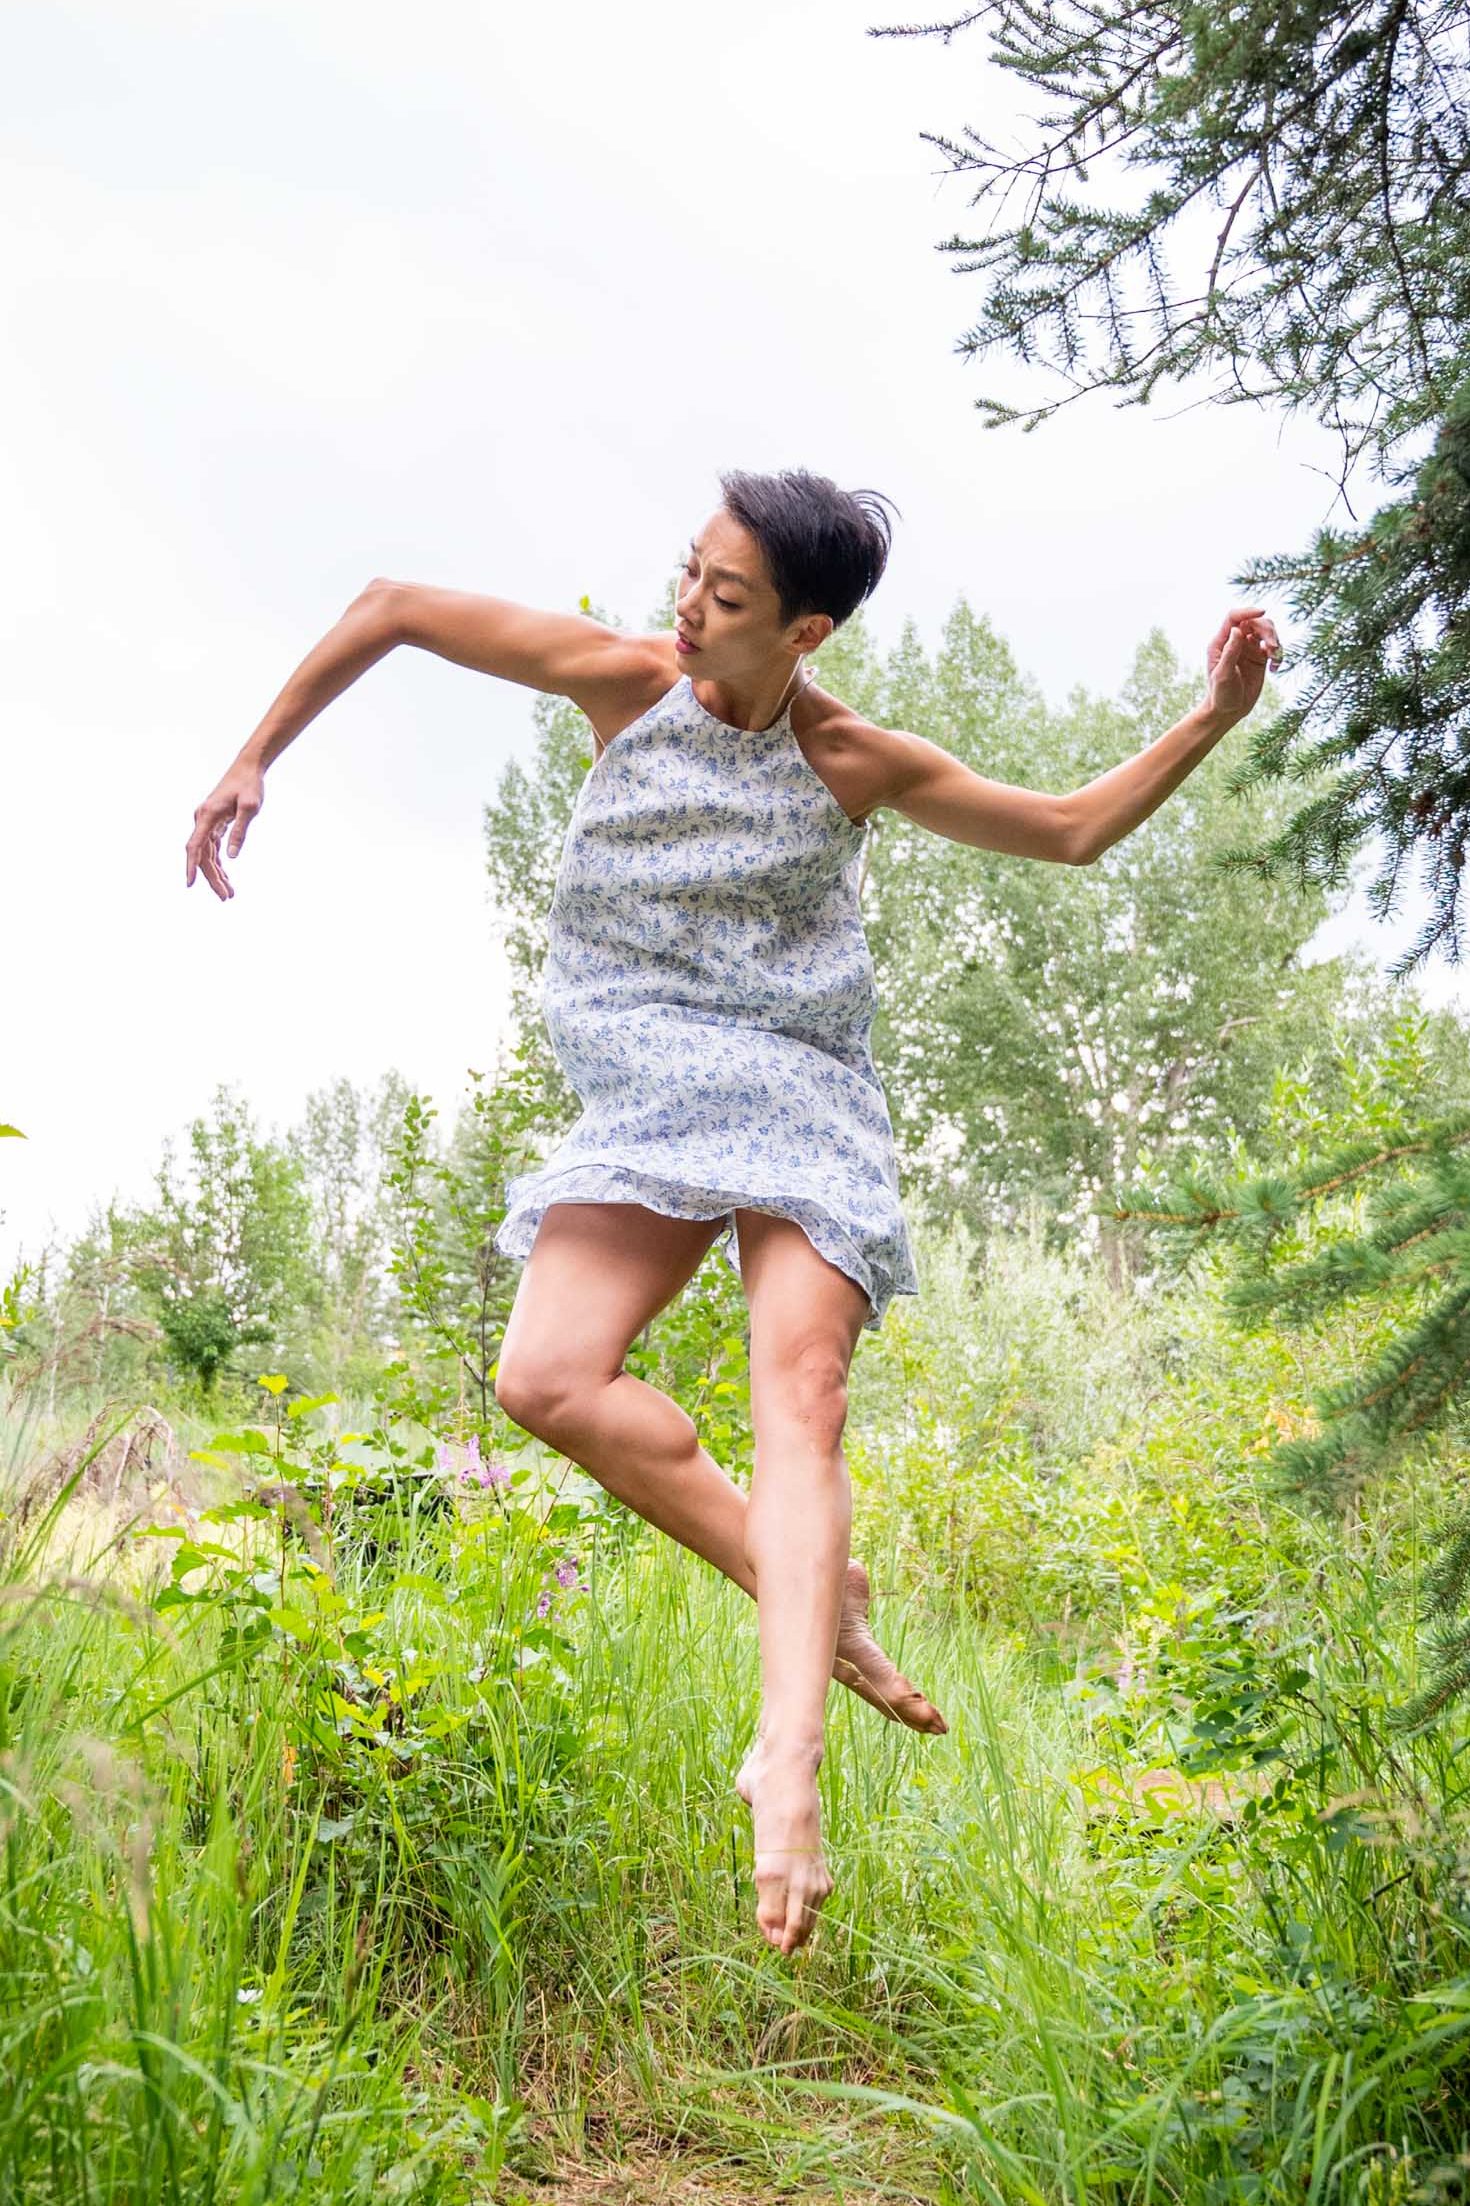 Caili Quan, with her short dark hair down, jumps in a low contemporary coupé derriere in a flowy white sheath dress. Her arms make an "S" shape, her right arm bent at the elbow to point down and her left pointing up. She looks slightly down on the right diagonal, past her arm. She dances in light green grass and brown dirt, with trees beside and behind her, the sky a light white-ish gray behind her. 